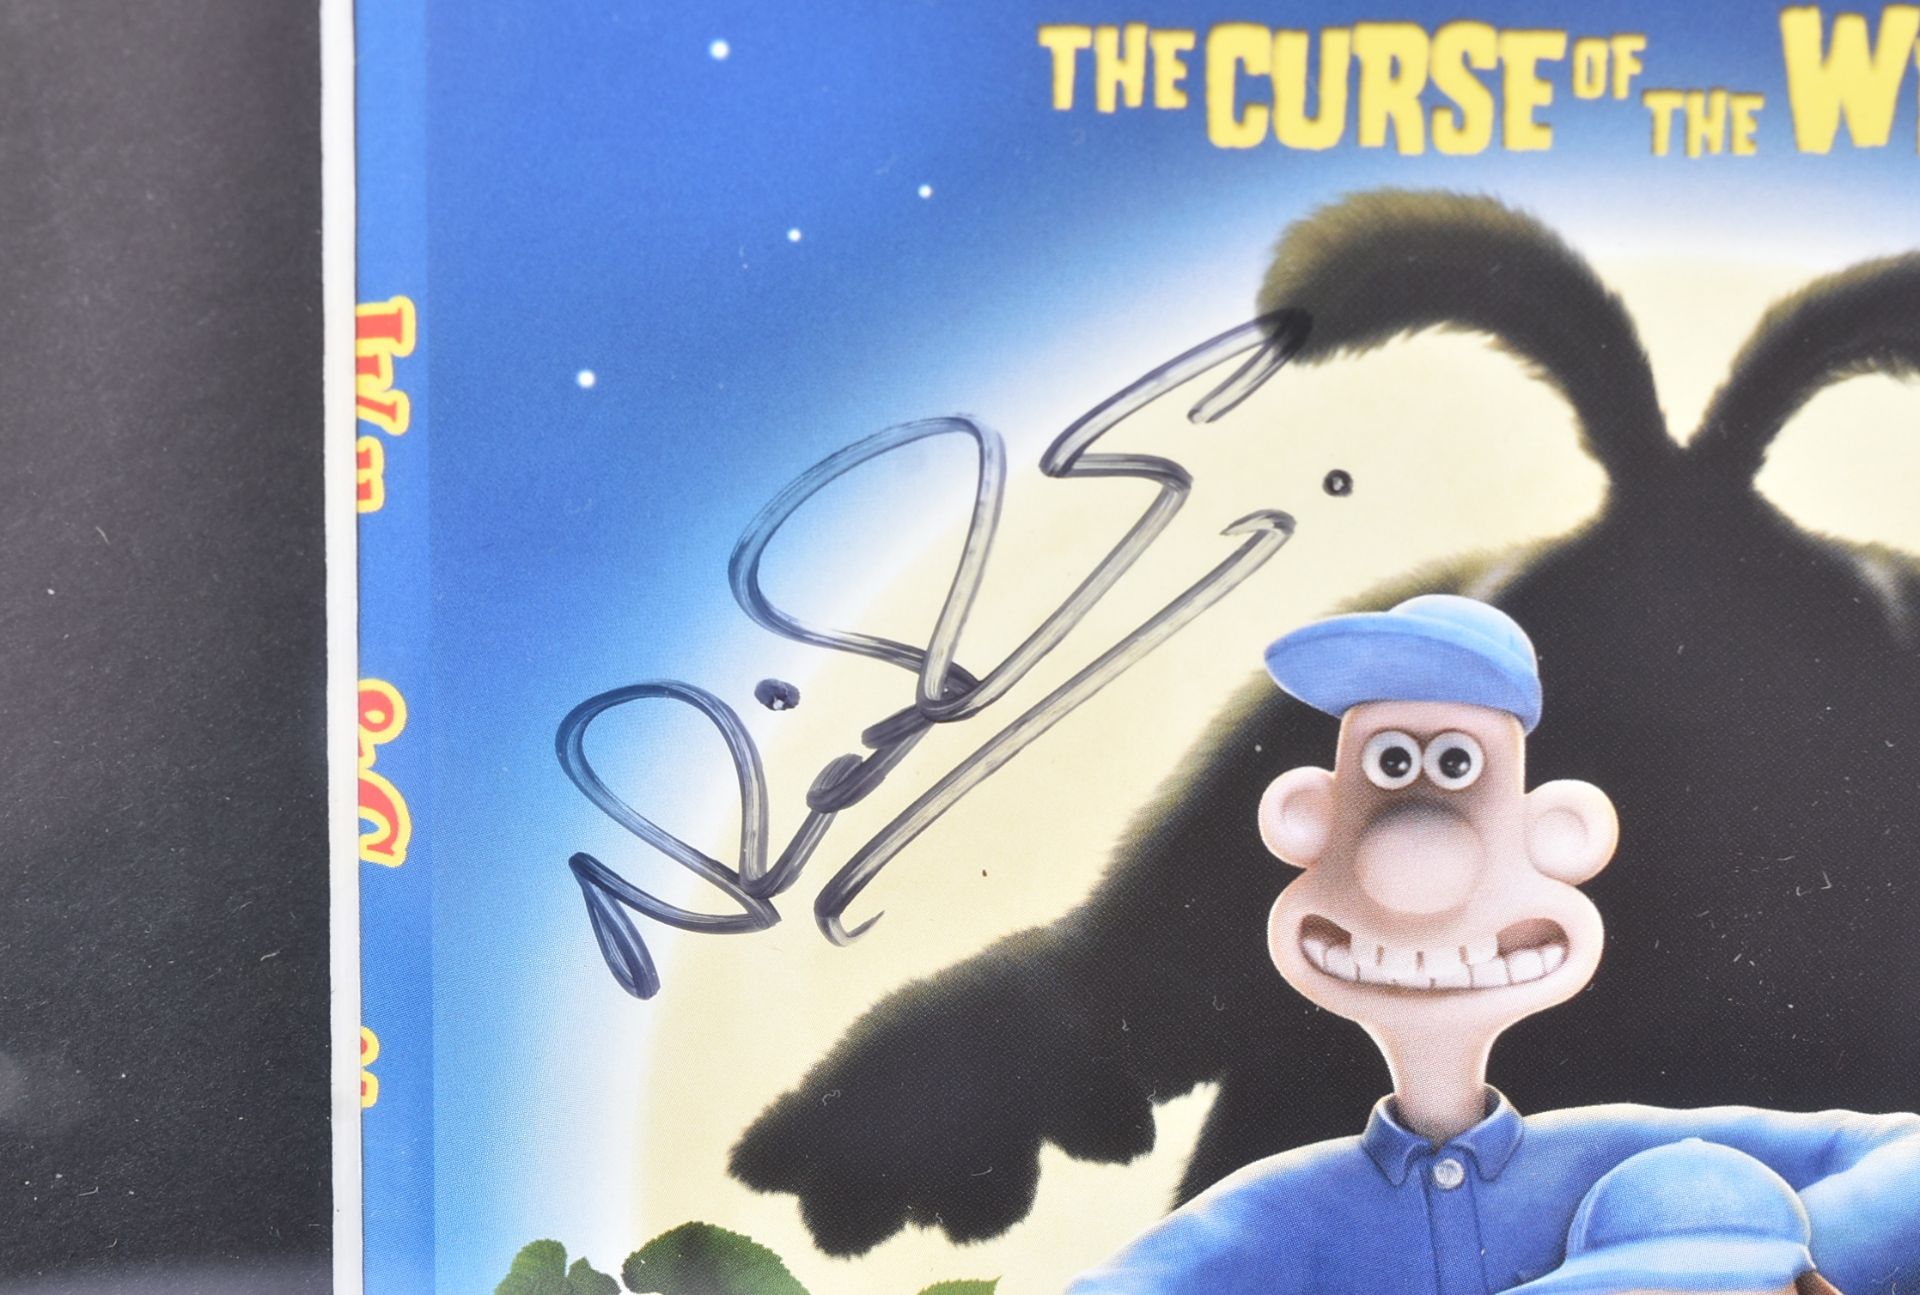 WALLACE & GROMIT - CURSE OF THE WERE-RABBIT - SIGNED DISPLAY - Image 3 of 3